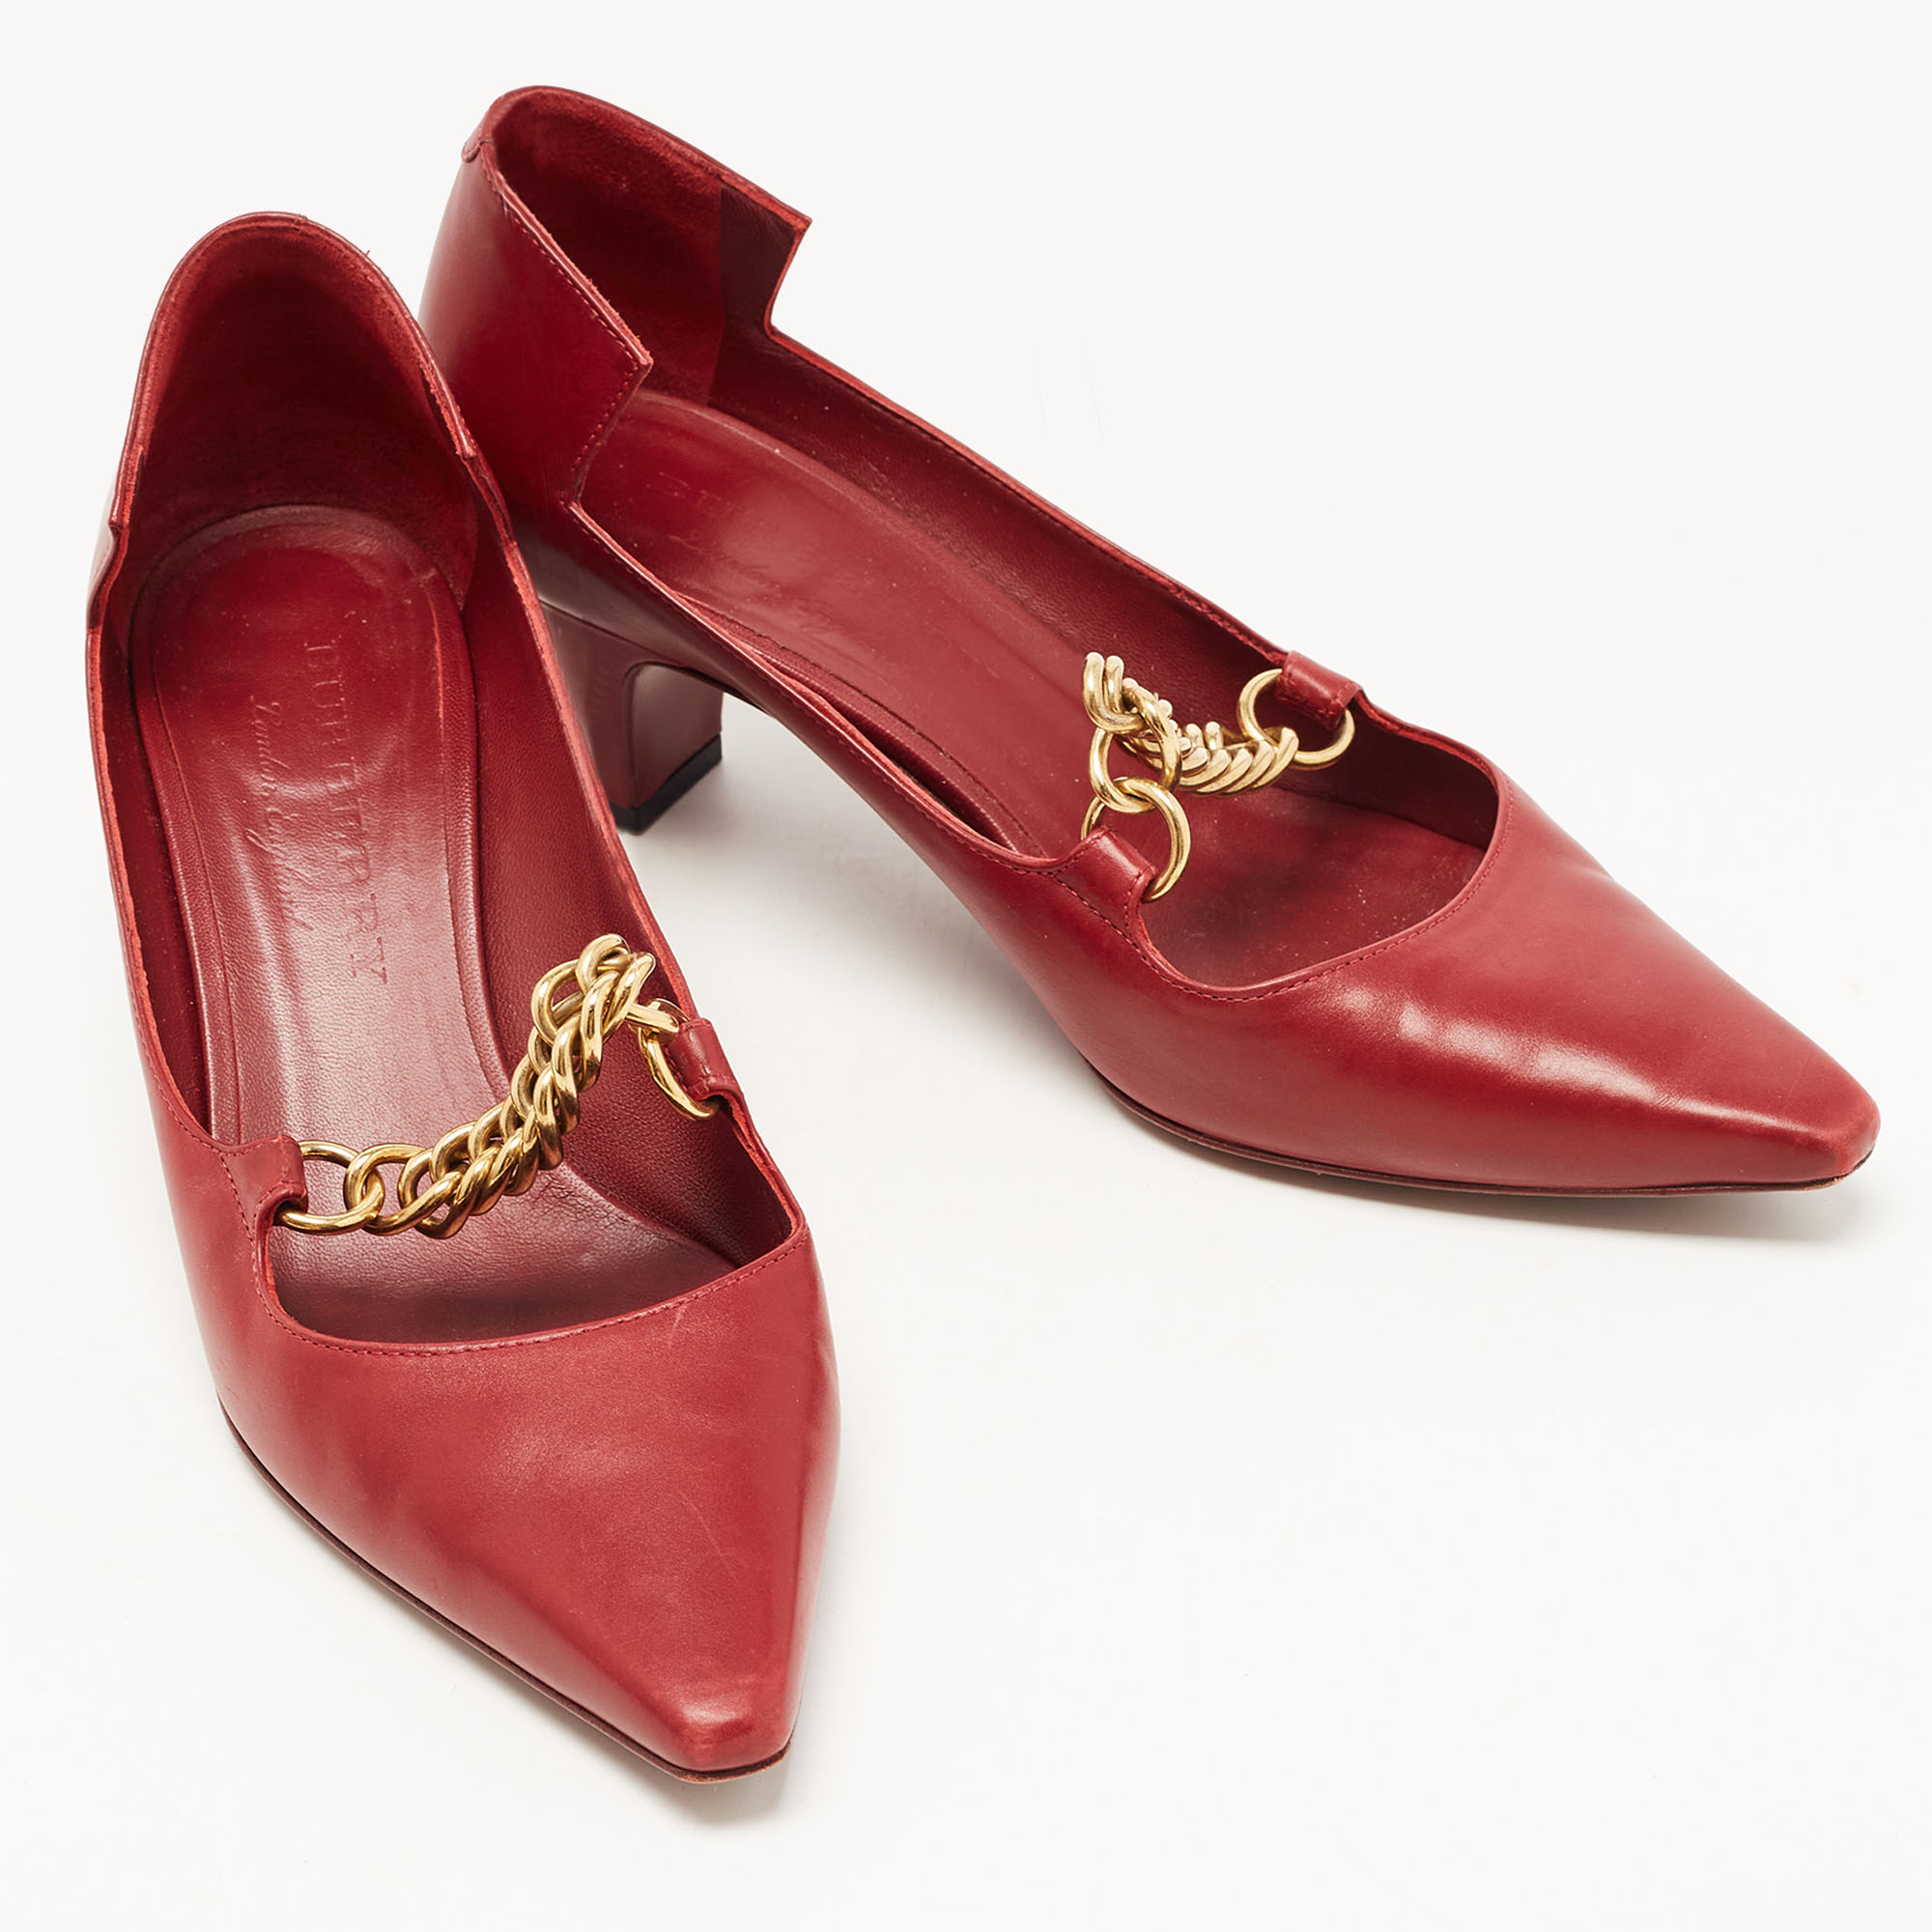 Burberry Red Leather Chain Embellished Pumps Size 38